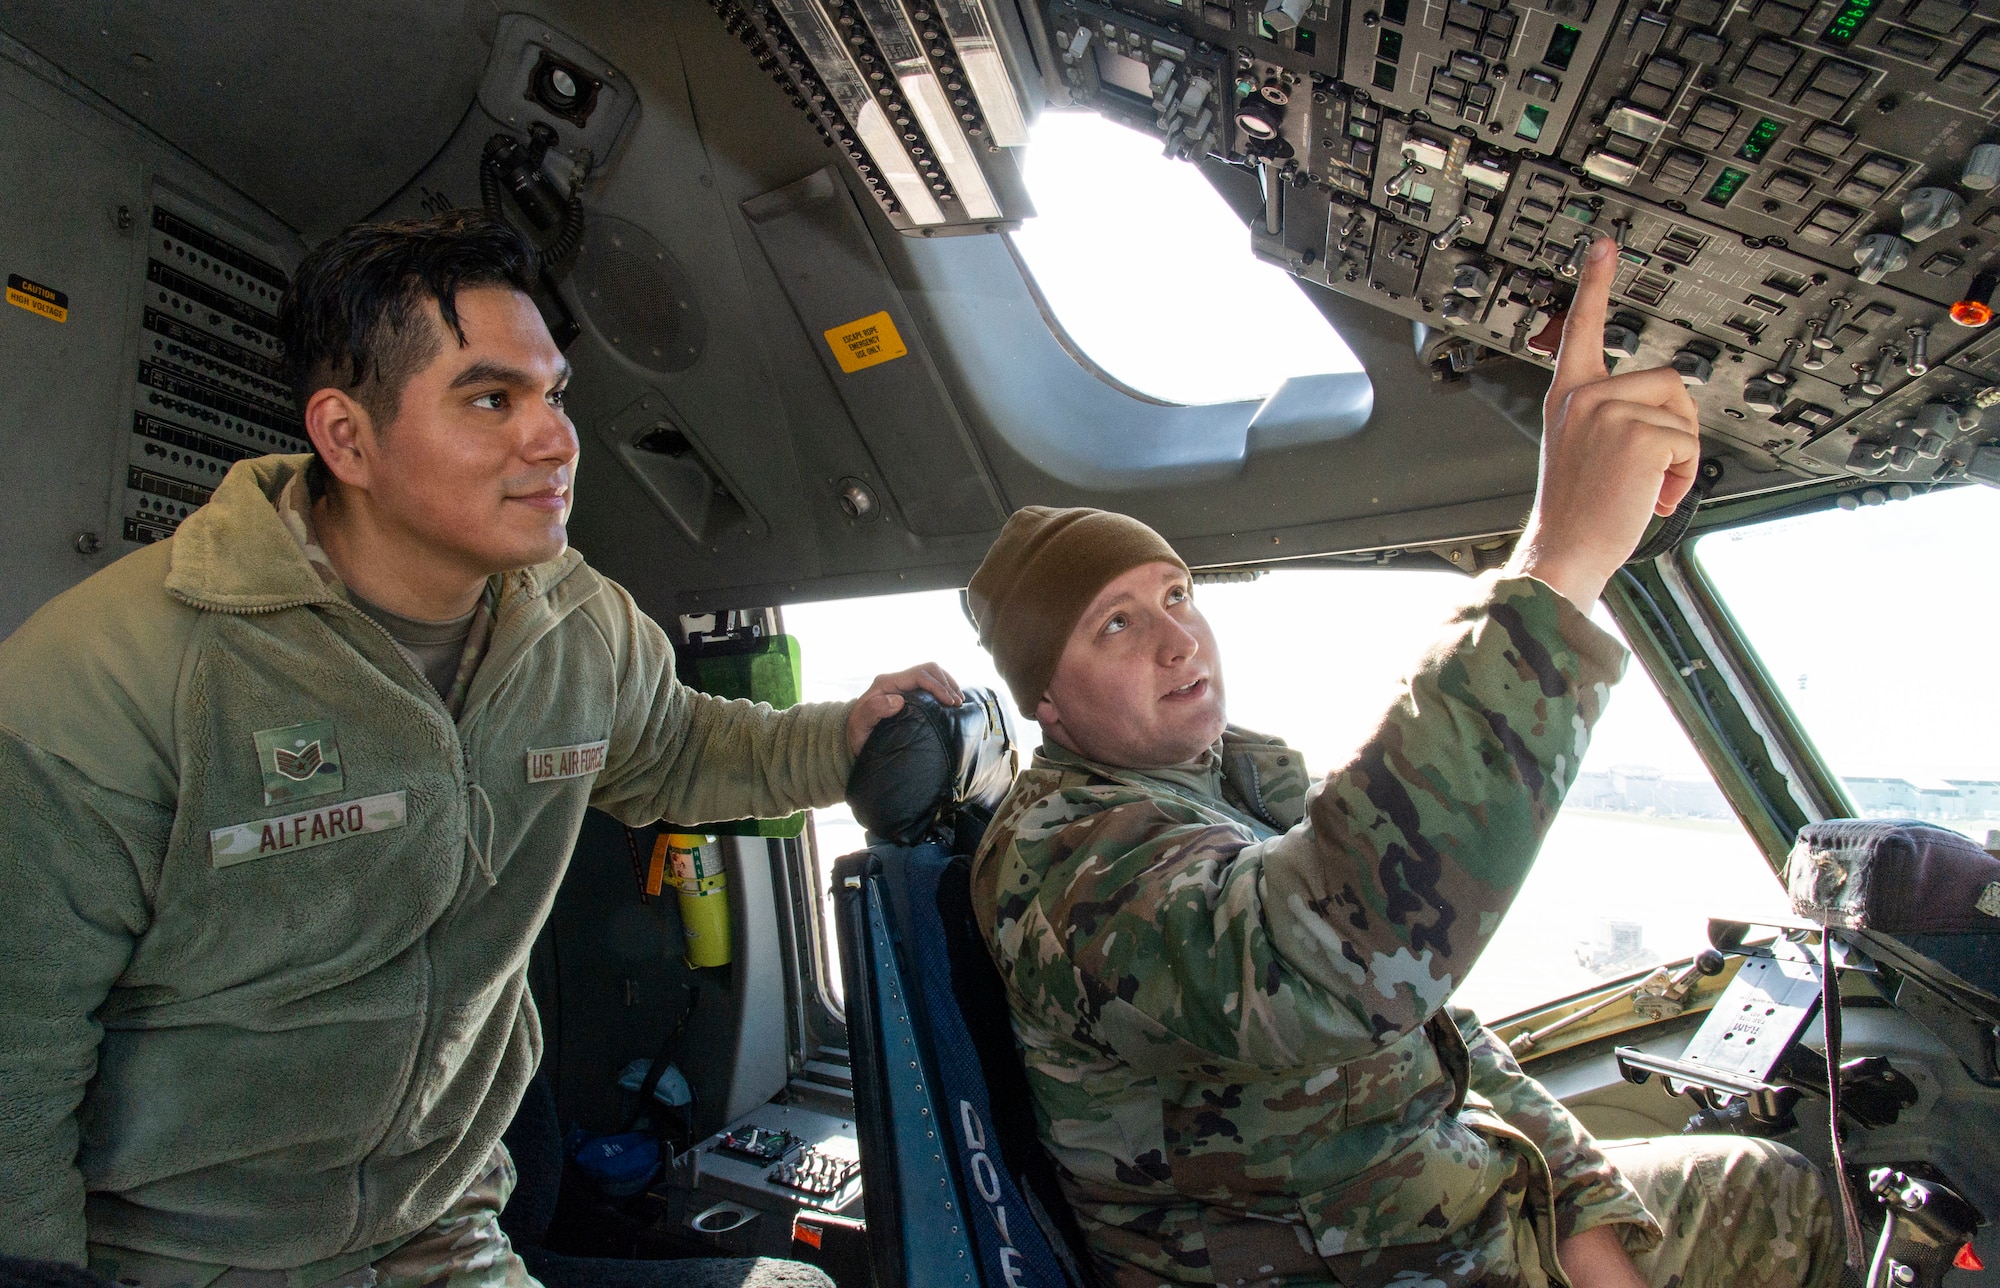 Staff Sgt. Renato Alfaro, left, 373rd Training Squadron, Detachment 3 C-17 aircraft general instructor, familiarizes Staff Sgt. Richard Watts, right, 436th Aerial Port Squadron load planner, with buttons on an overhead C-17 Globemaster III flight deck panel at Dover Air Force Base, Delaware, March 29, 2022. Alfaro provided Watts and other students participating in a multi-capable Airmen training class with basic C-17 aircraft familiarization. (U.S. Air Force photo by Roland Balik)